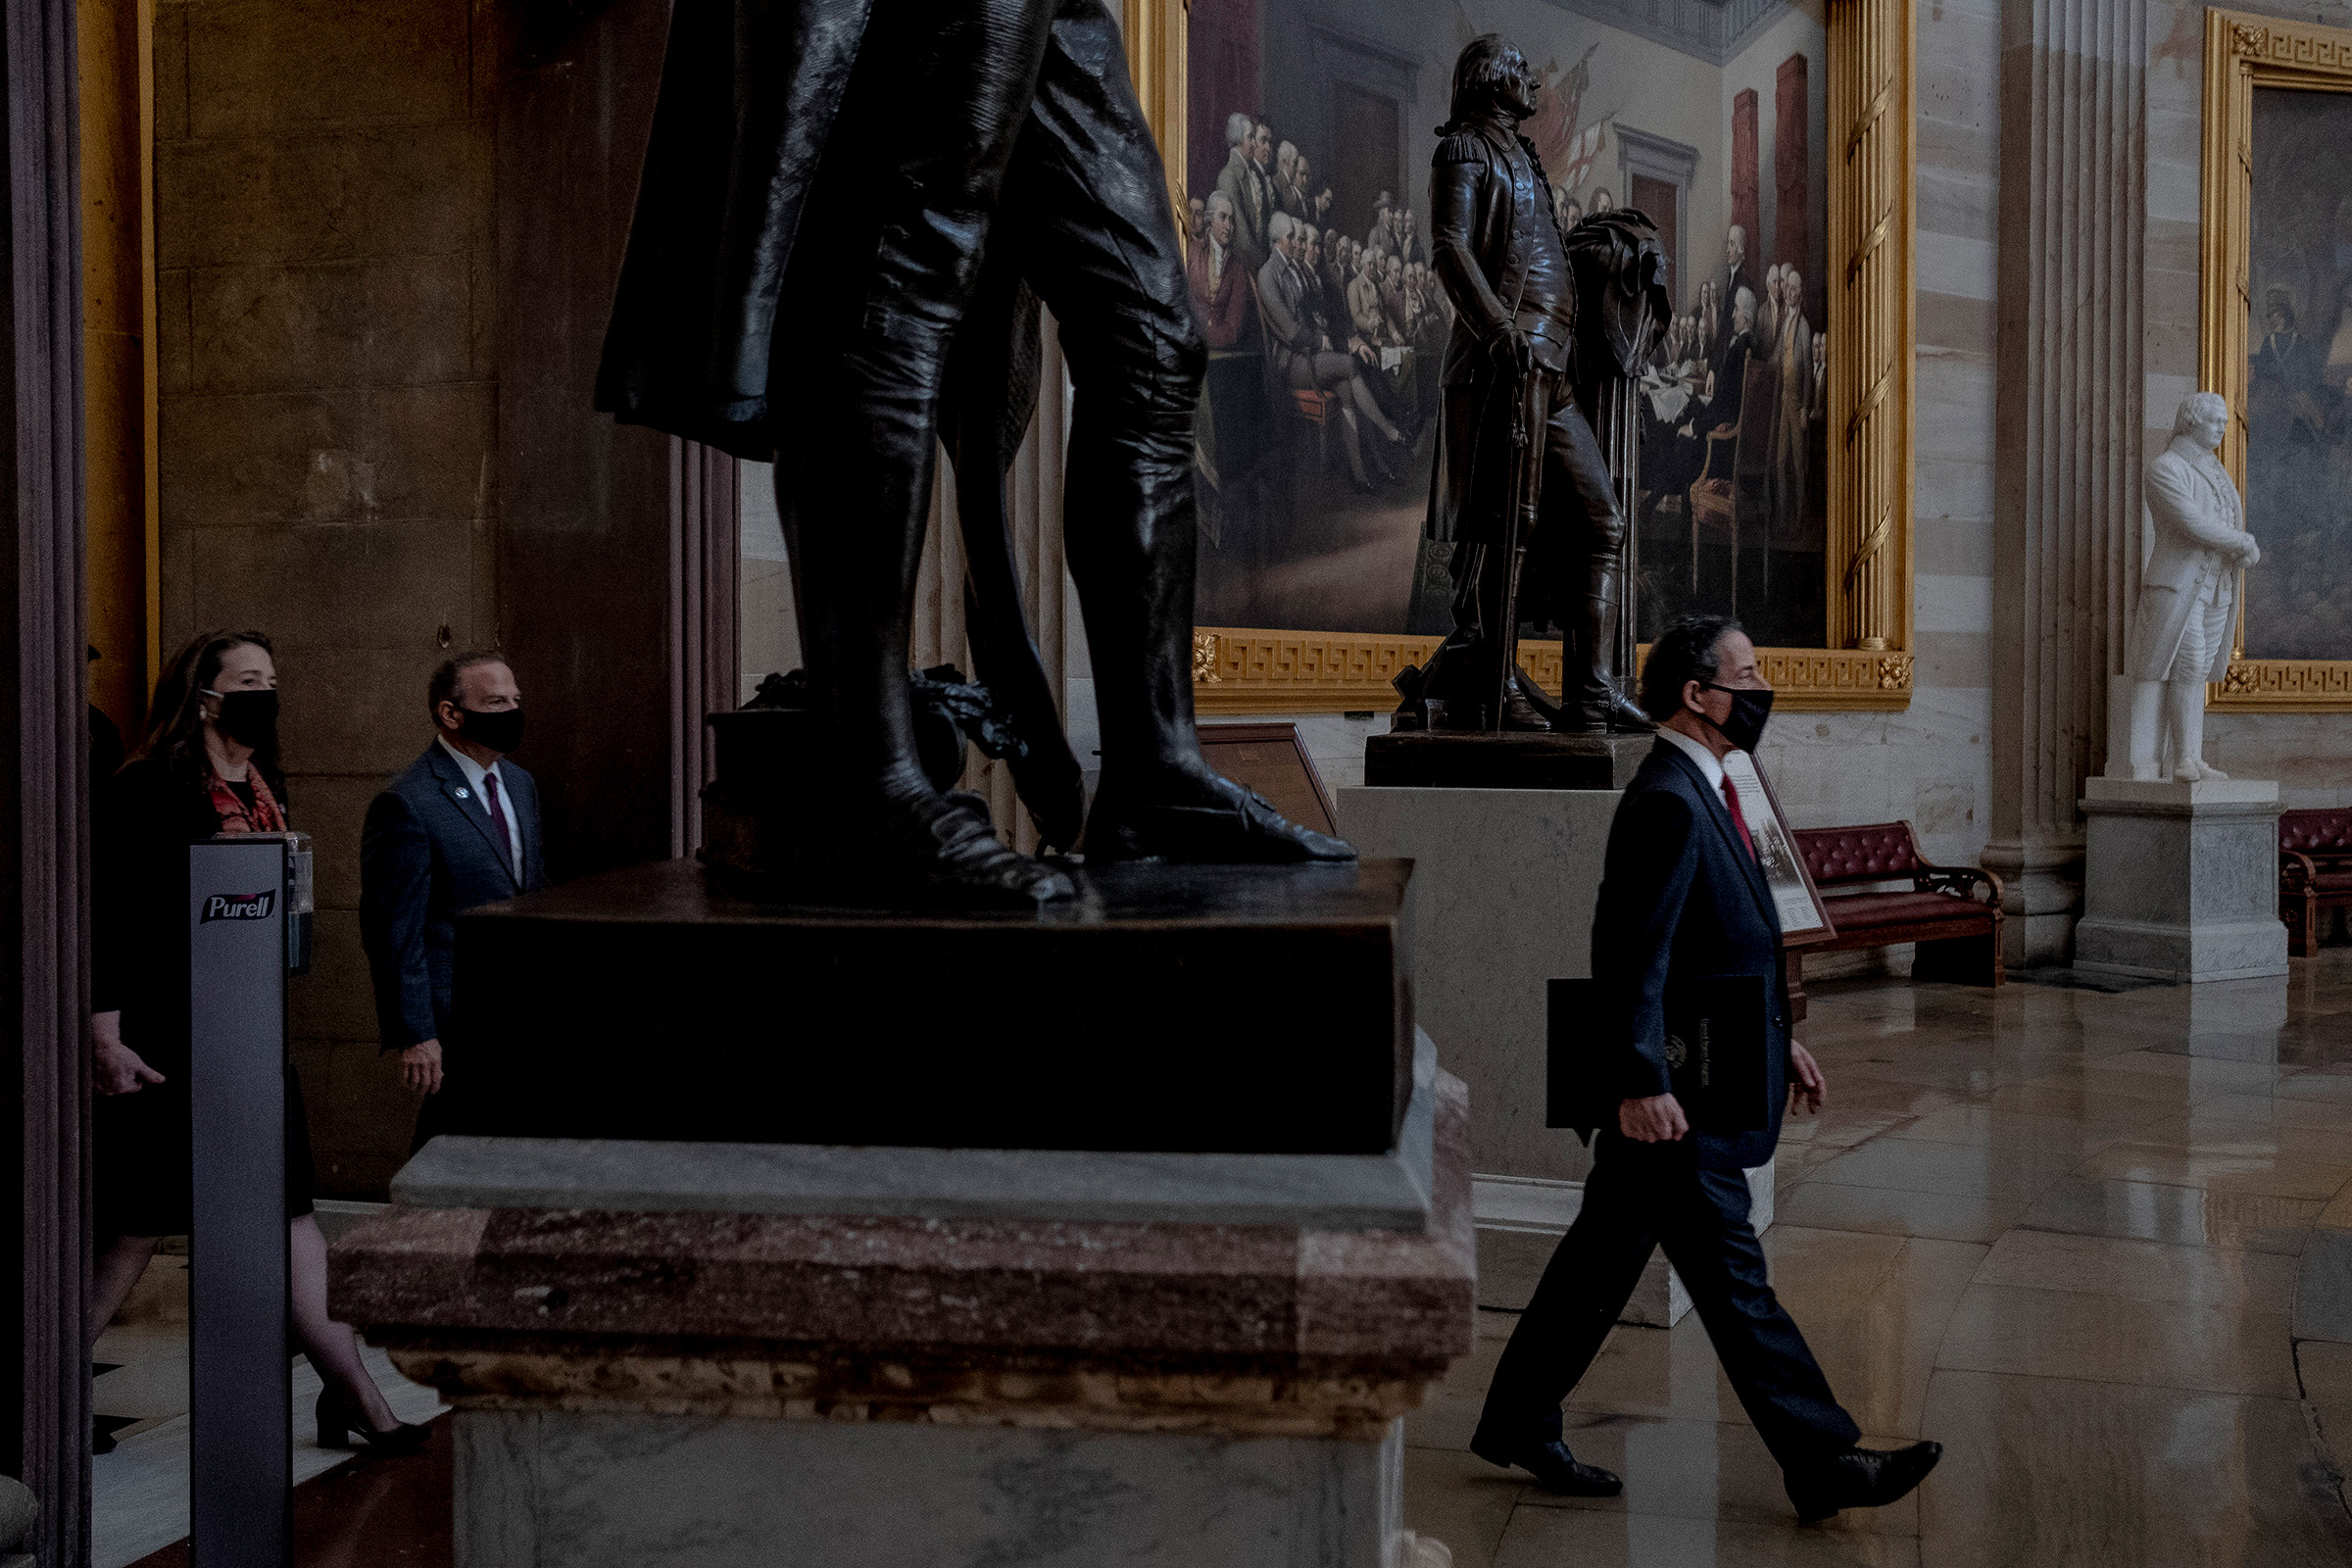 Lead U.S. House impeachment manager Rep. Jamie Raskin walks to the Senate floor for the start of the impeachment trial at the Capitol in Washington, on Feb. 9, 2021. (Gabriella Demczuk for TIME)